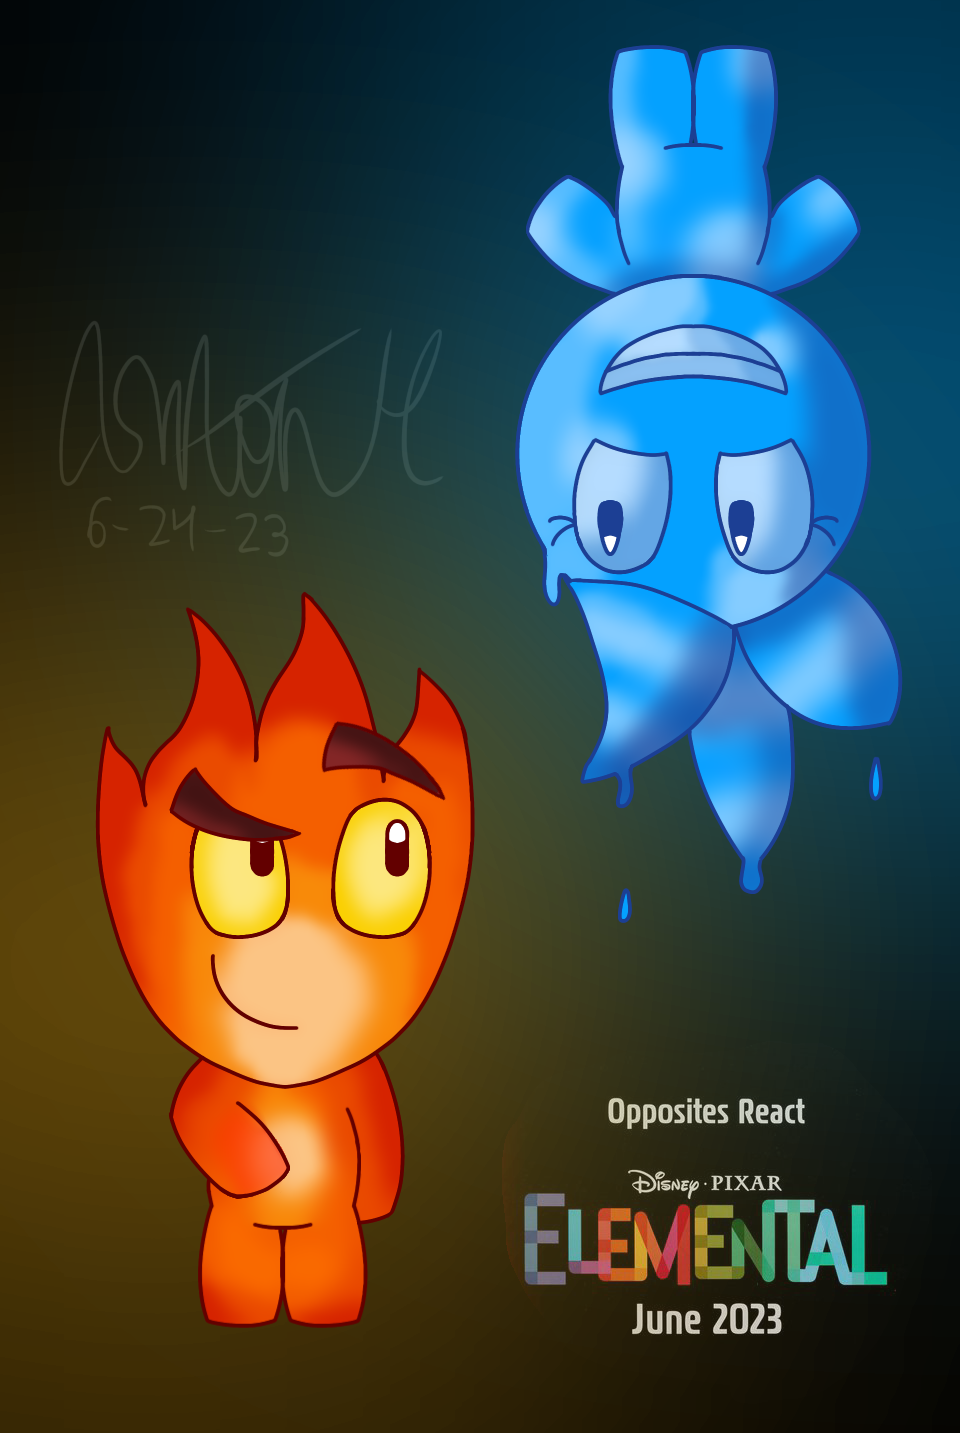 Fire Boy and Water Girl Poster Thingy by jadedpintobean on DeviantArt